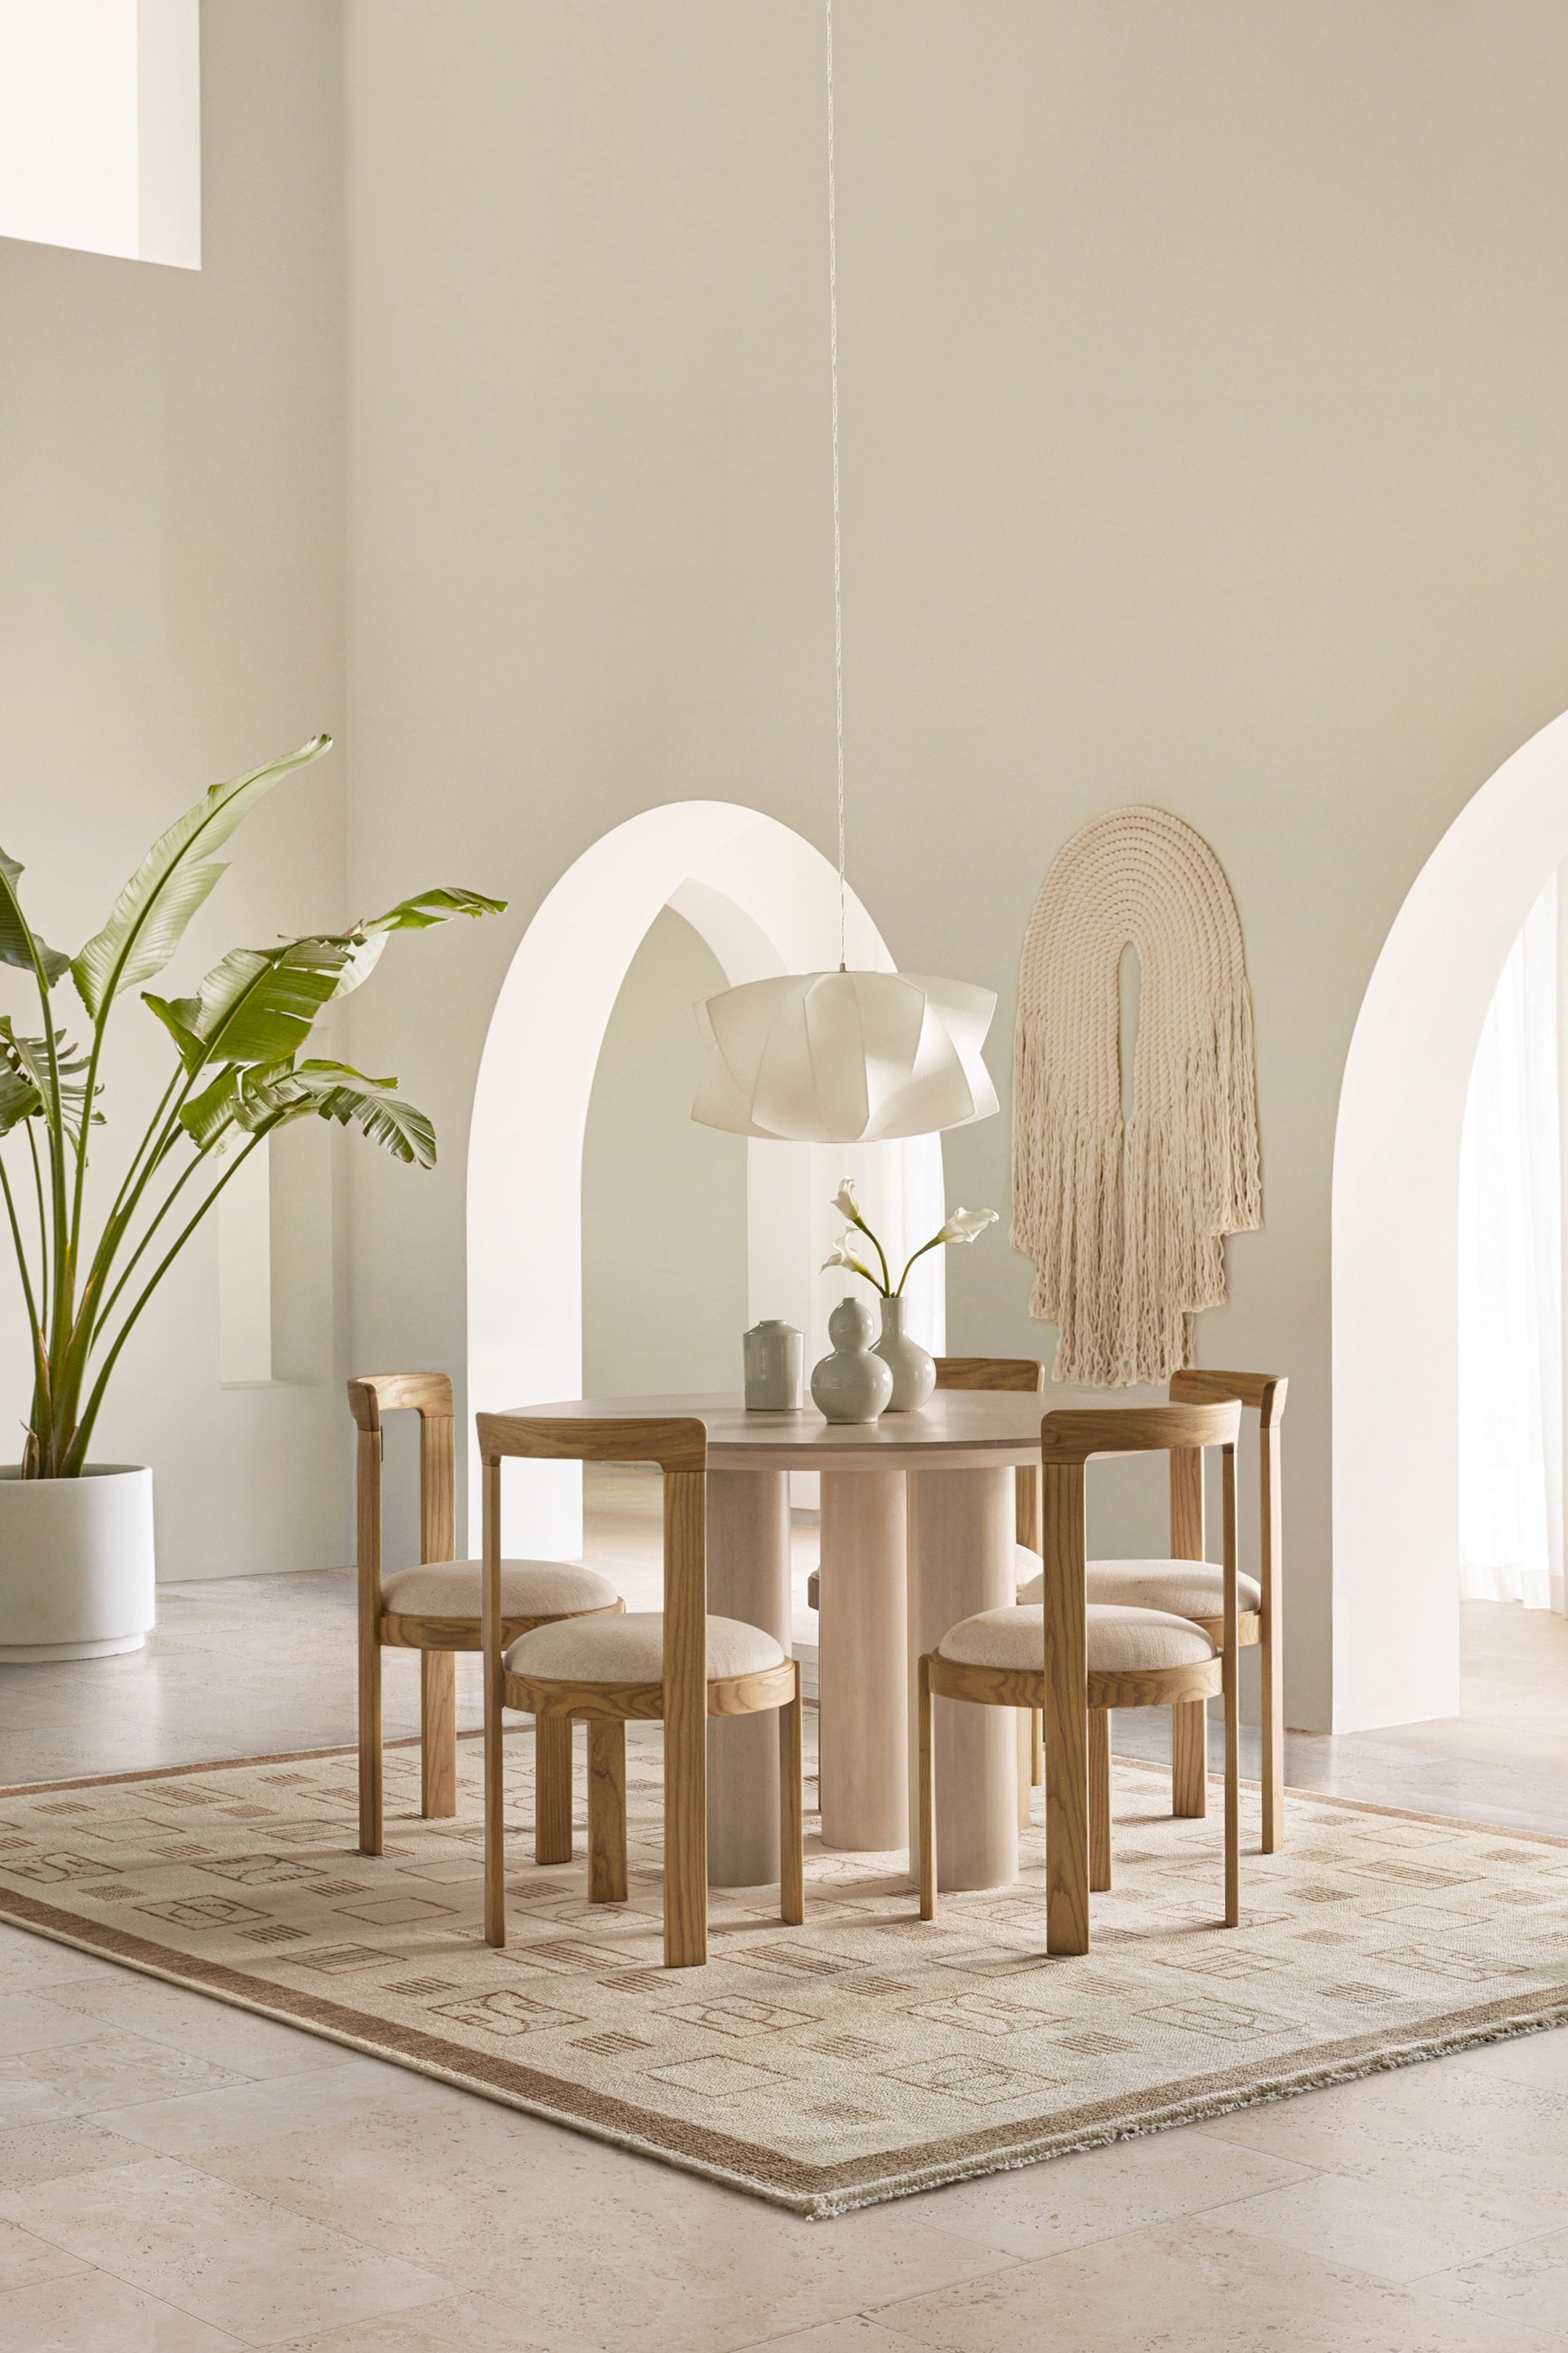 A modern and light dining room has a round light wood dining table surrounded by five wooden Tobie dining chairs with upholstered seats, and a modern white sculptural light fixture hanging over the table.